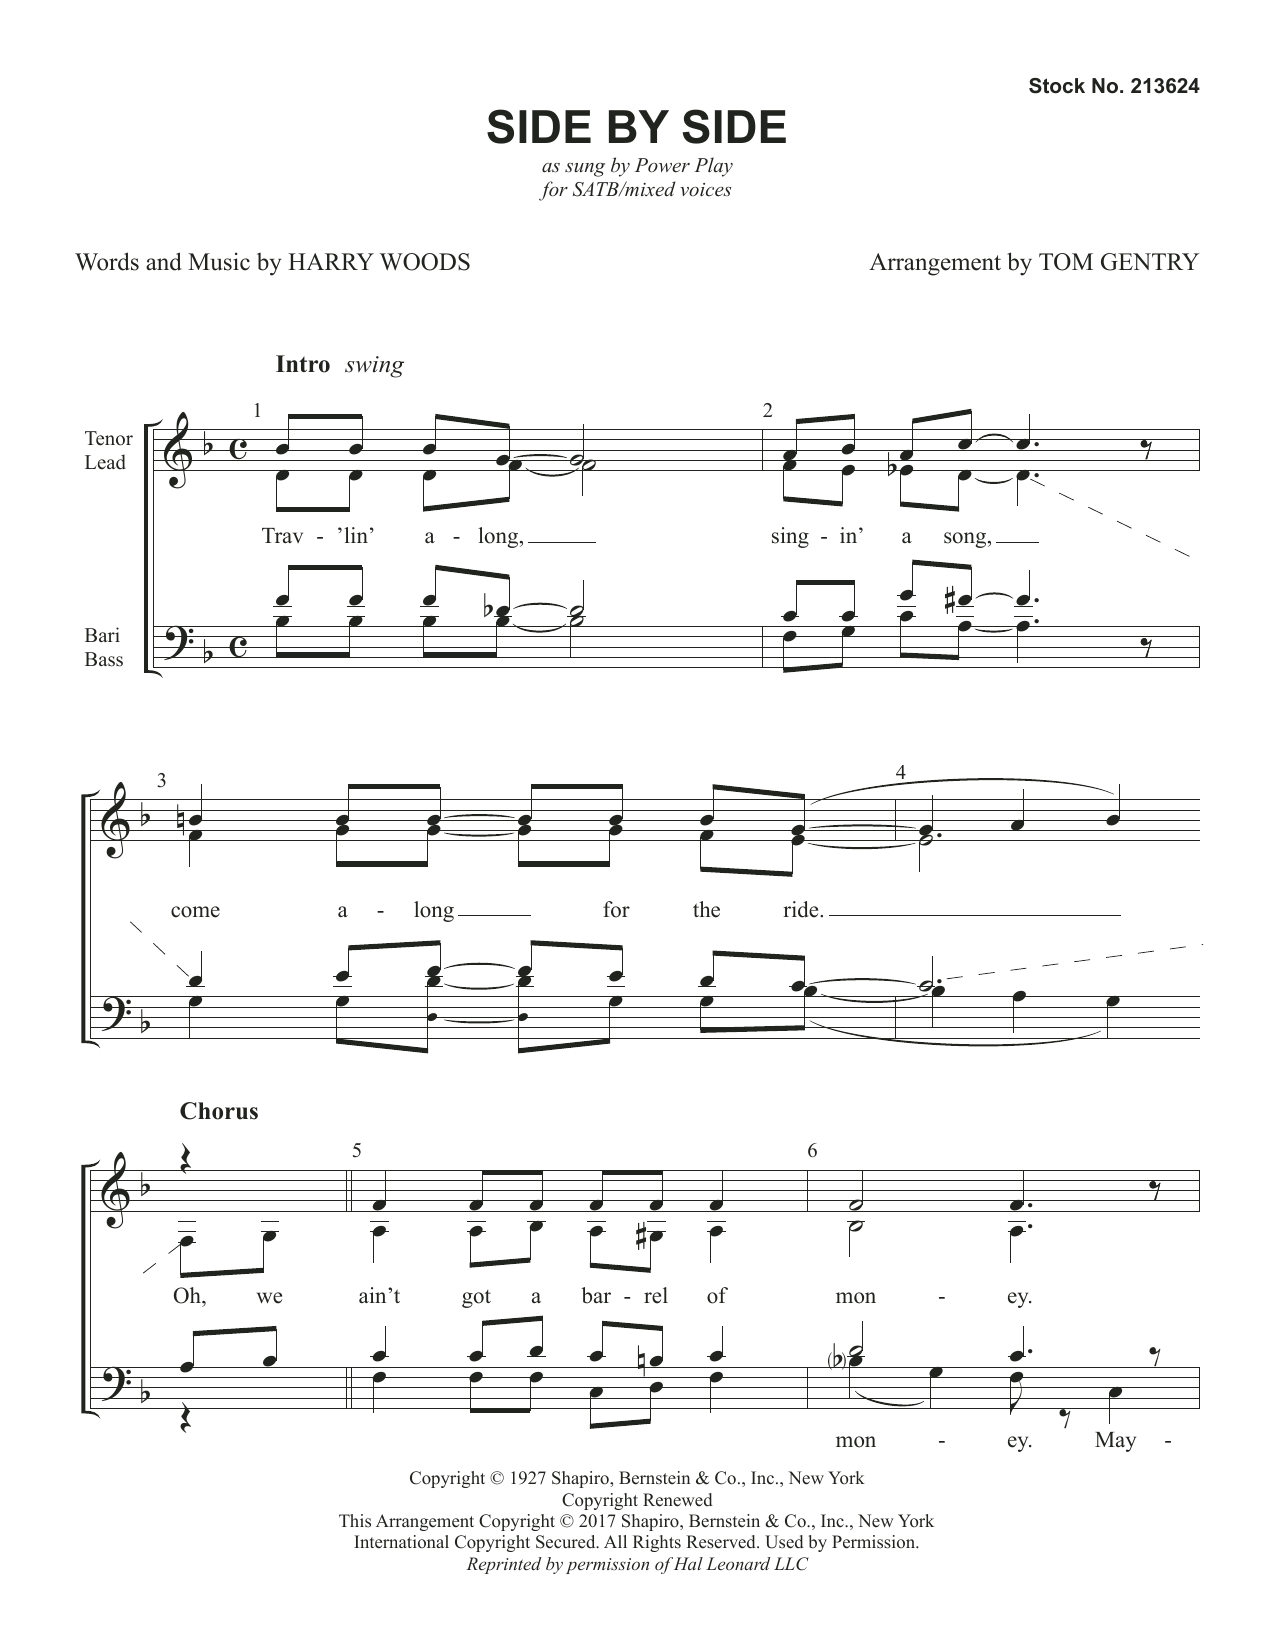 Download Power Play Side By Side (arr. Tom Gentry) Sheet Music